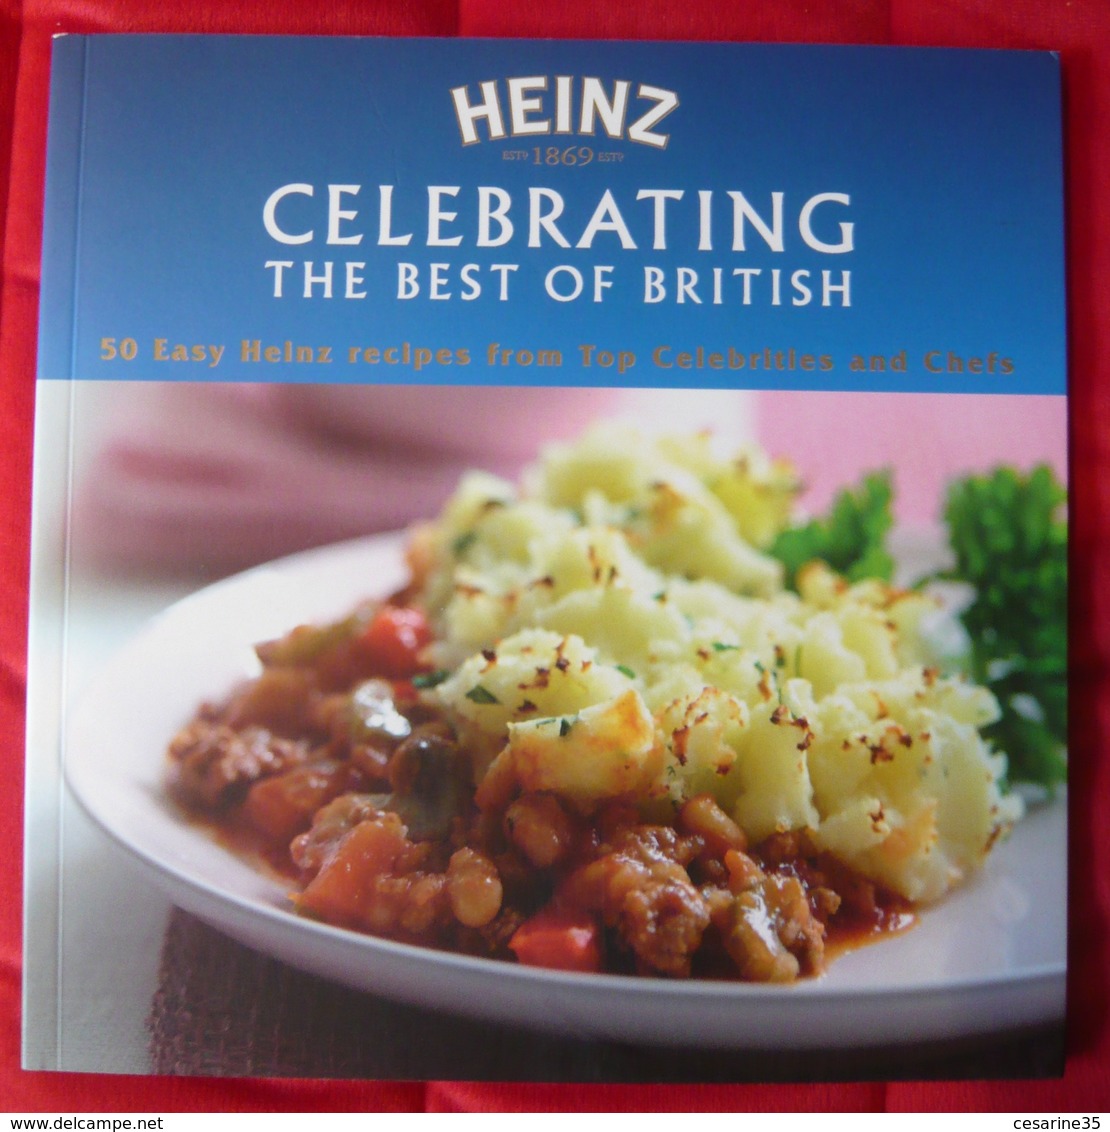 Heinz Celebrating The Best Of British – 50 Easy Heinz Recipes From Top Celebrities And Chefs - Britannica